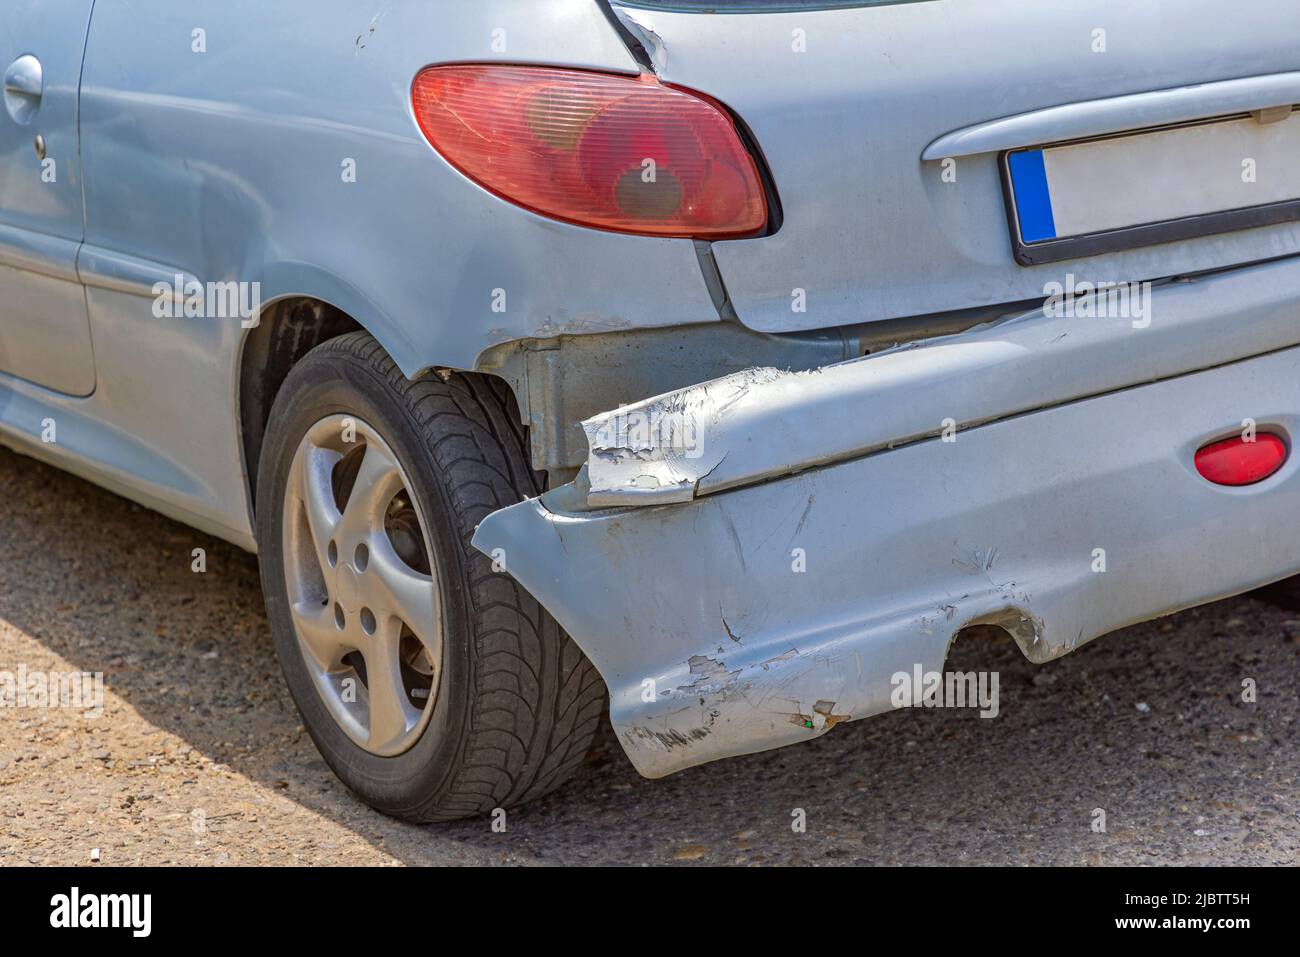 Hanging Rear Bumper Off at Small Car Damage Accident Stock Photo